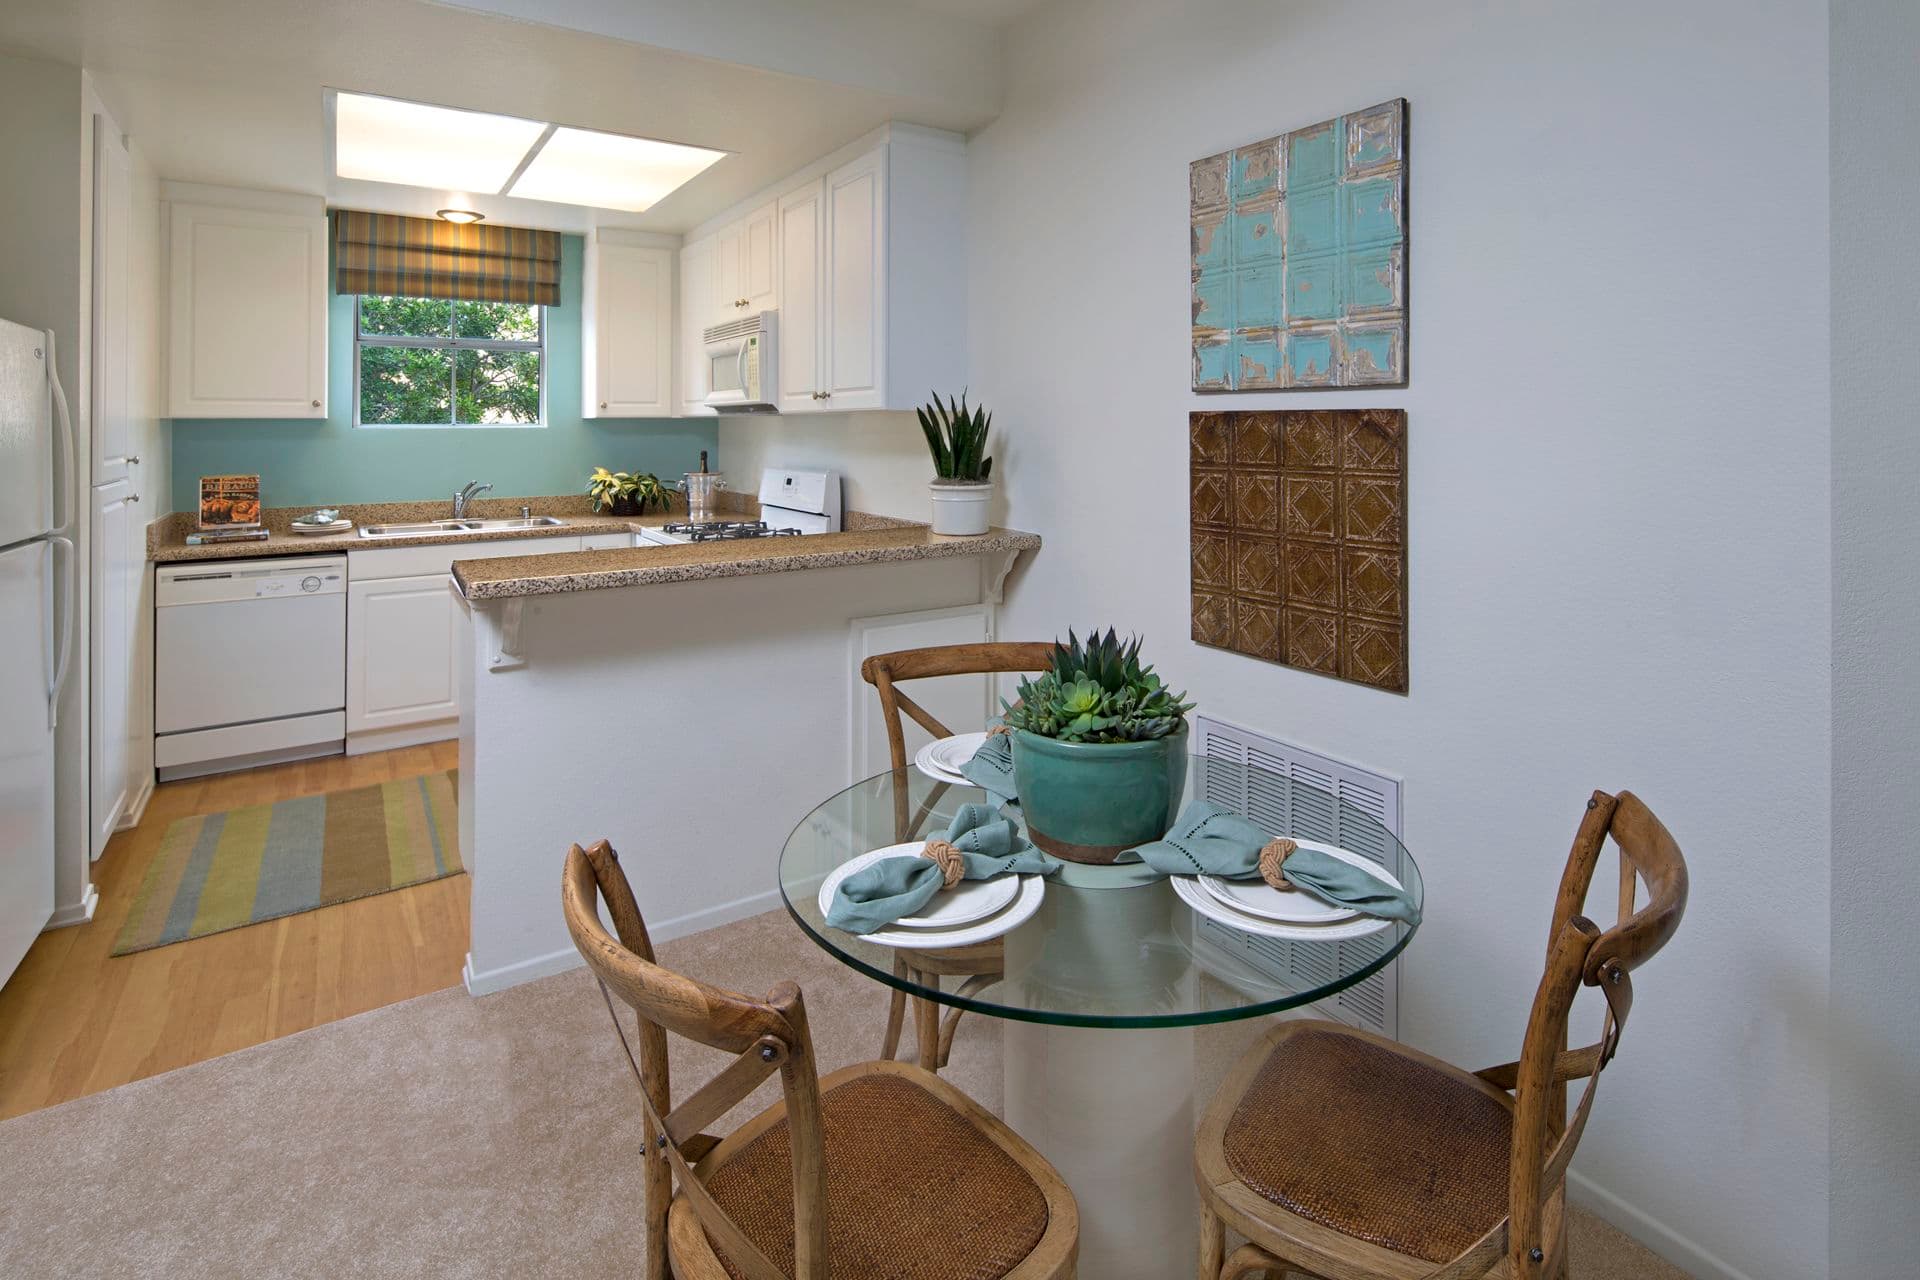 Interior view of kitchen and dining room at Santa Rosa Apartment Homes in Irvine, CA.